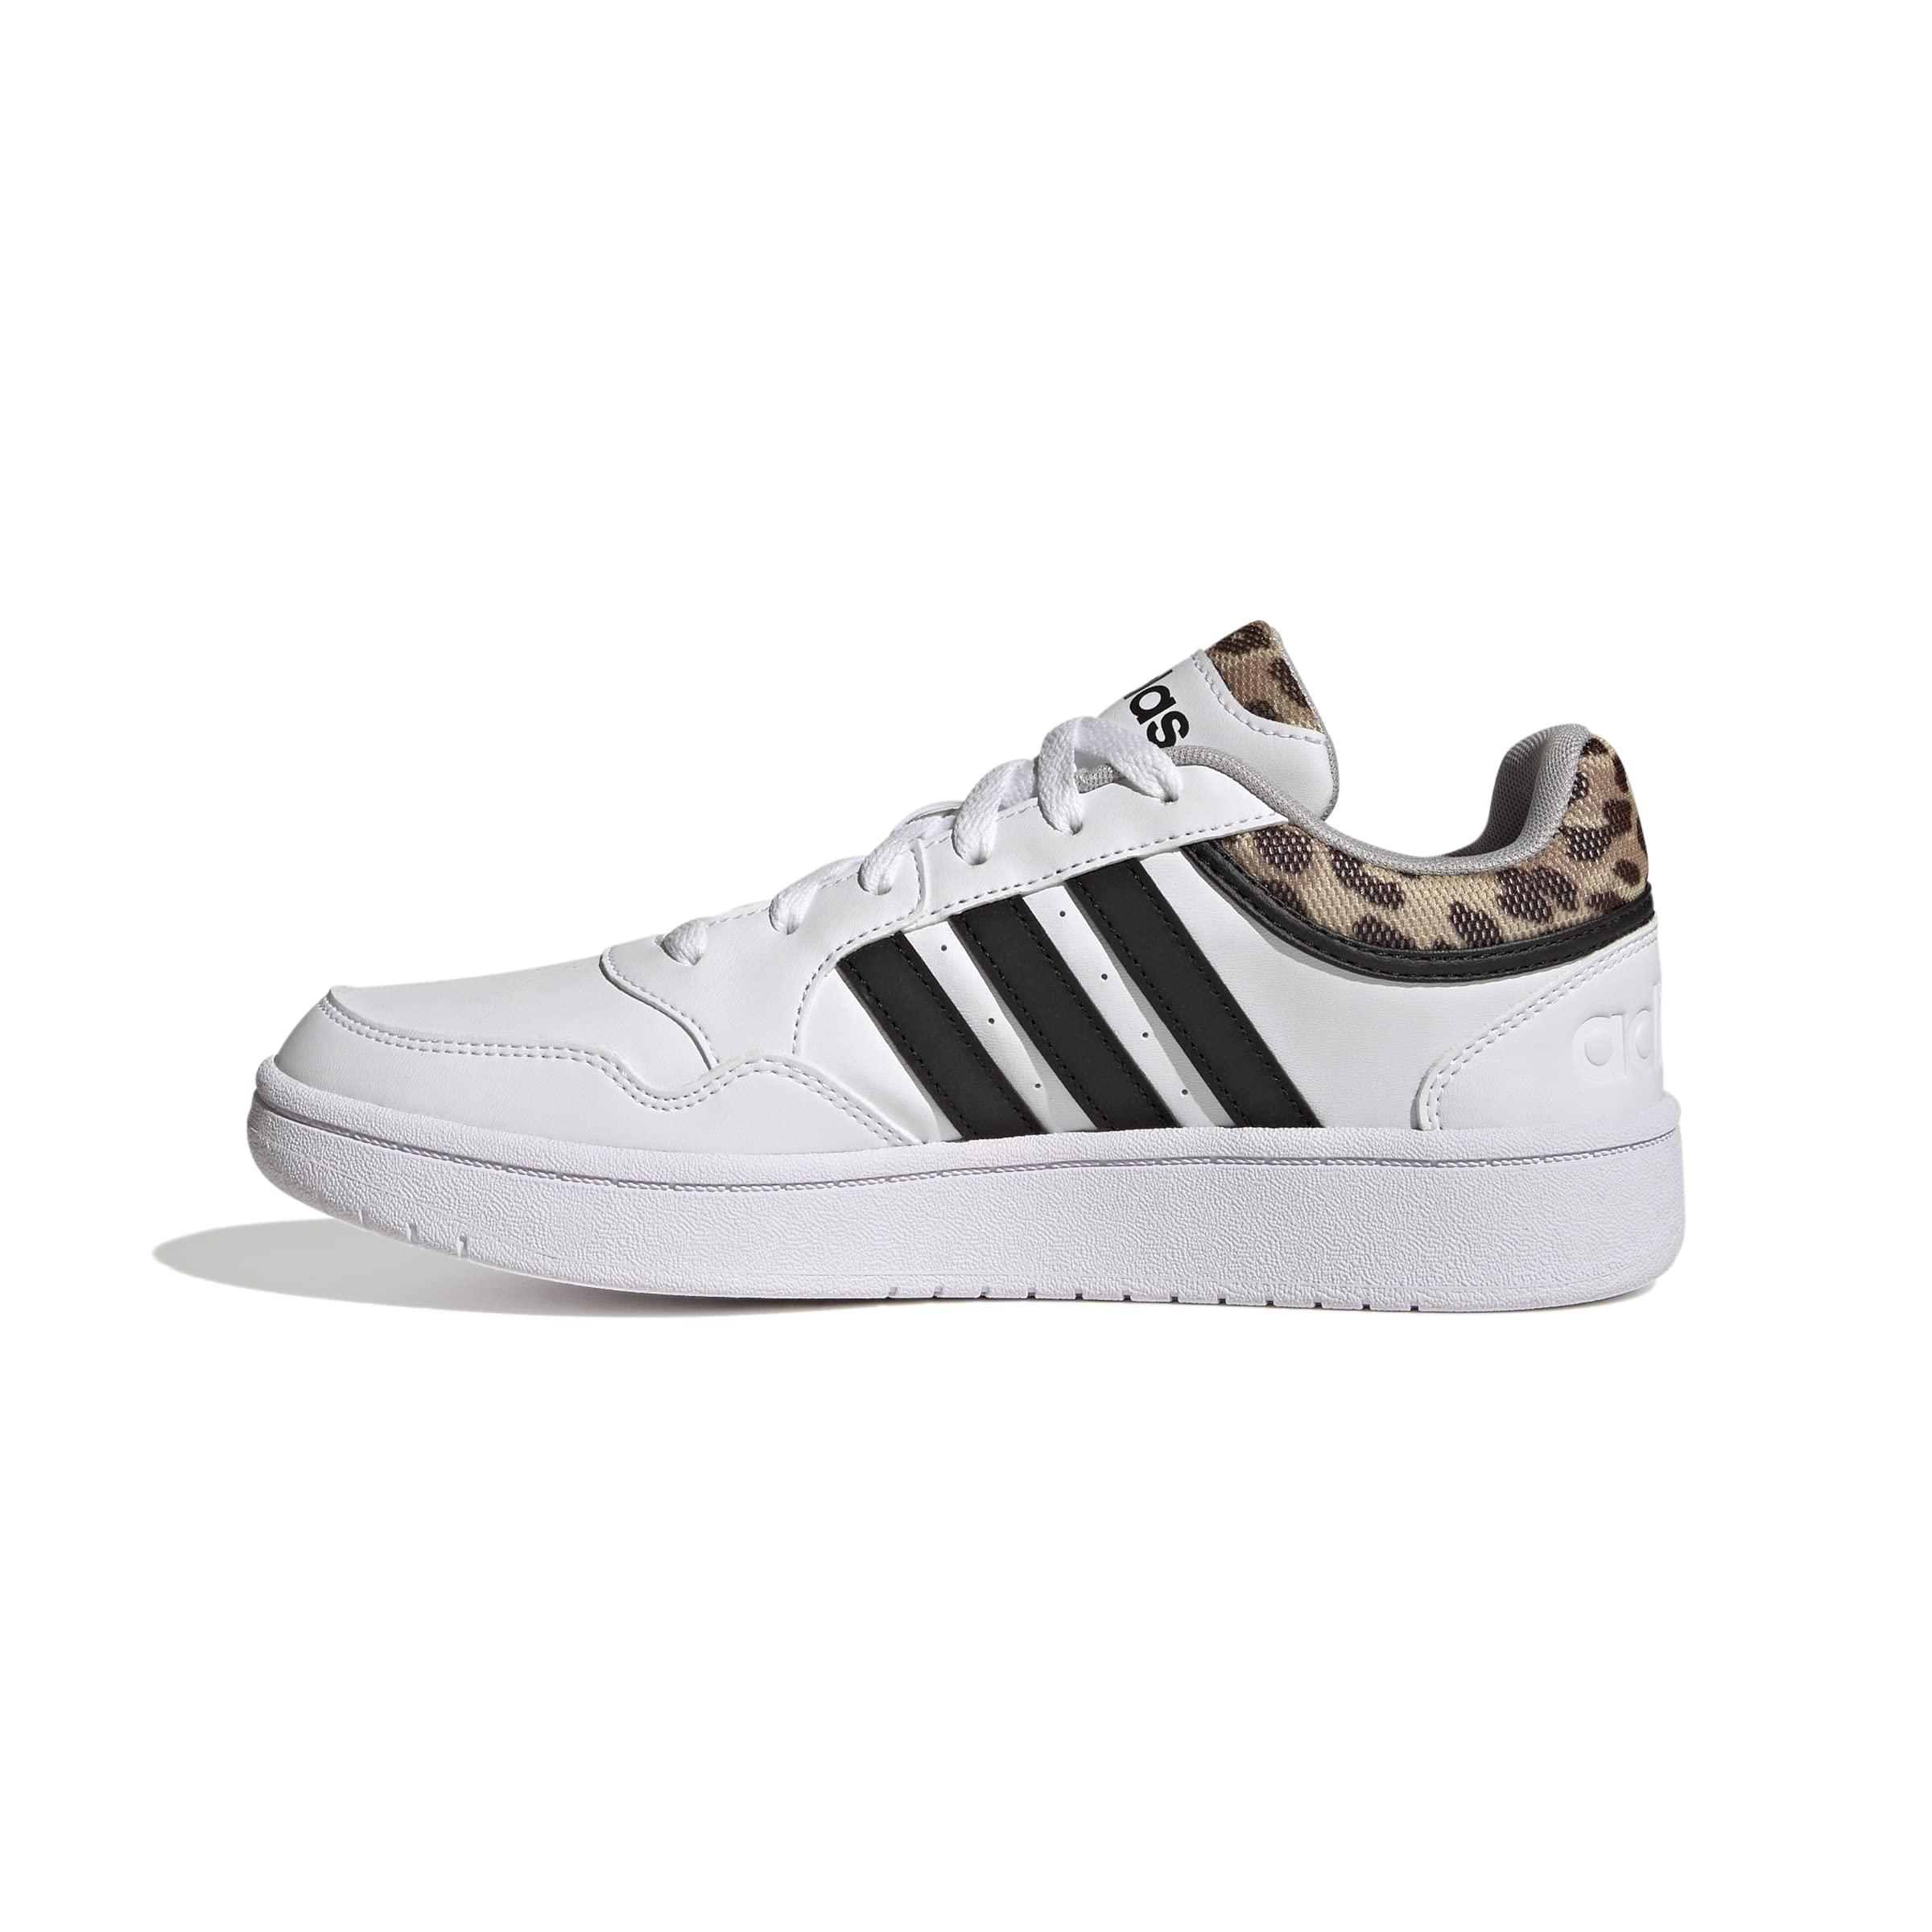 adidas Synthetic Hoops 3.0 Basketball Shoe in White | Lyst